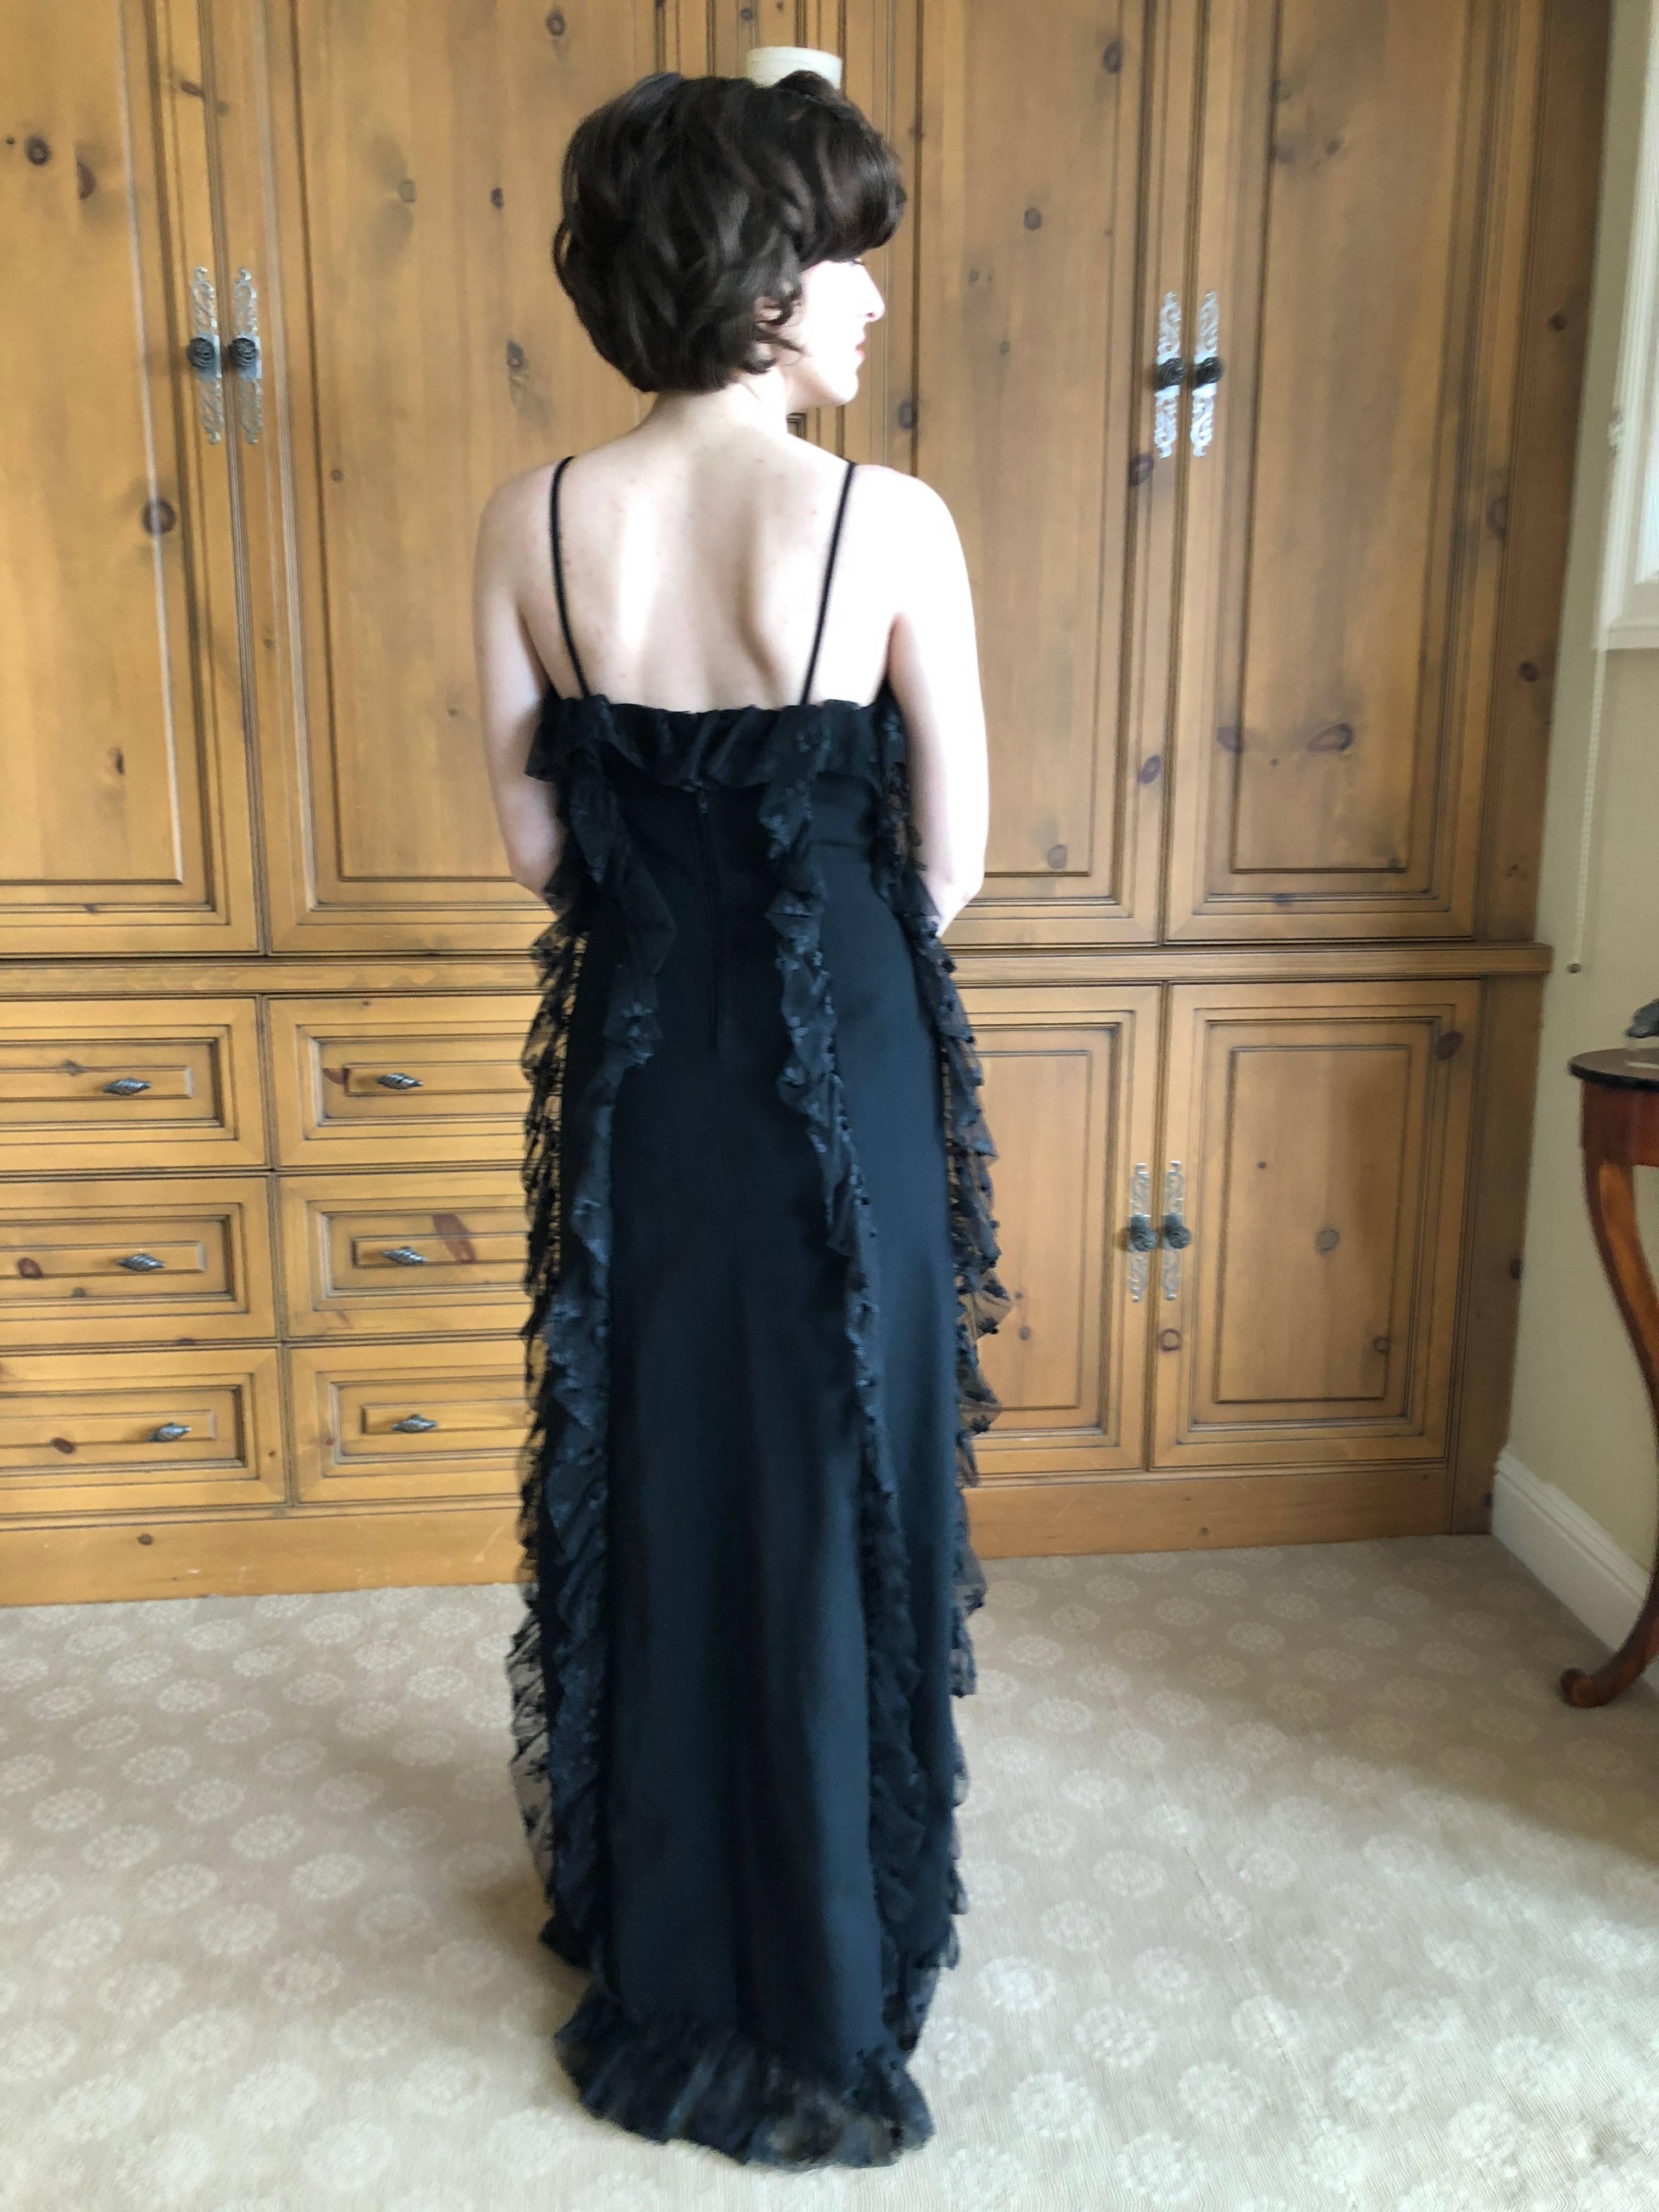 Cardinali Spring 1974 Black Ruffle Lace Trim Evening Gown For Sale 10